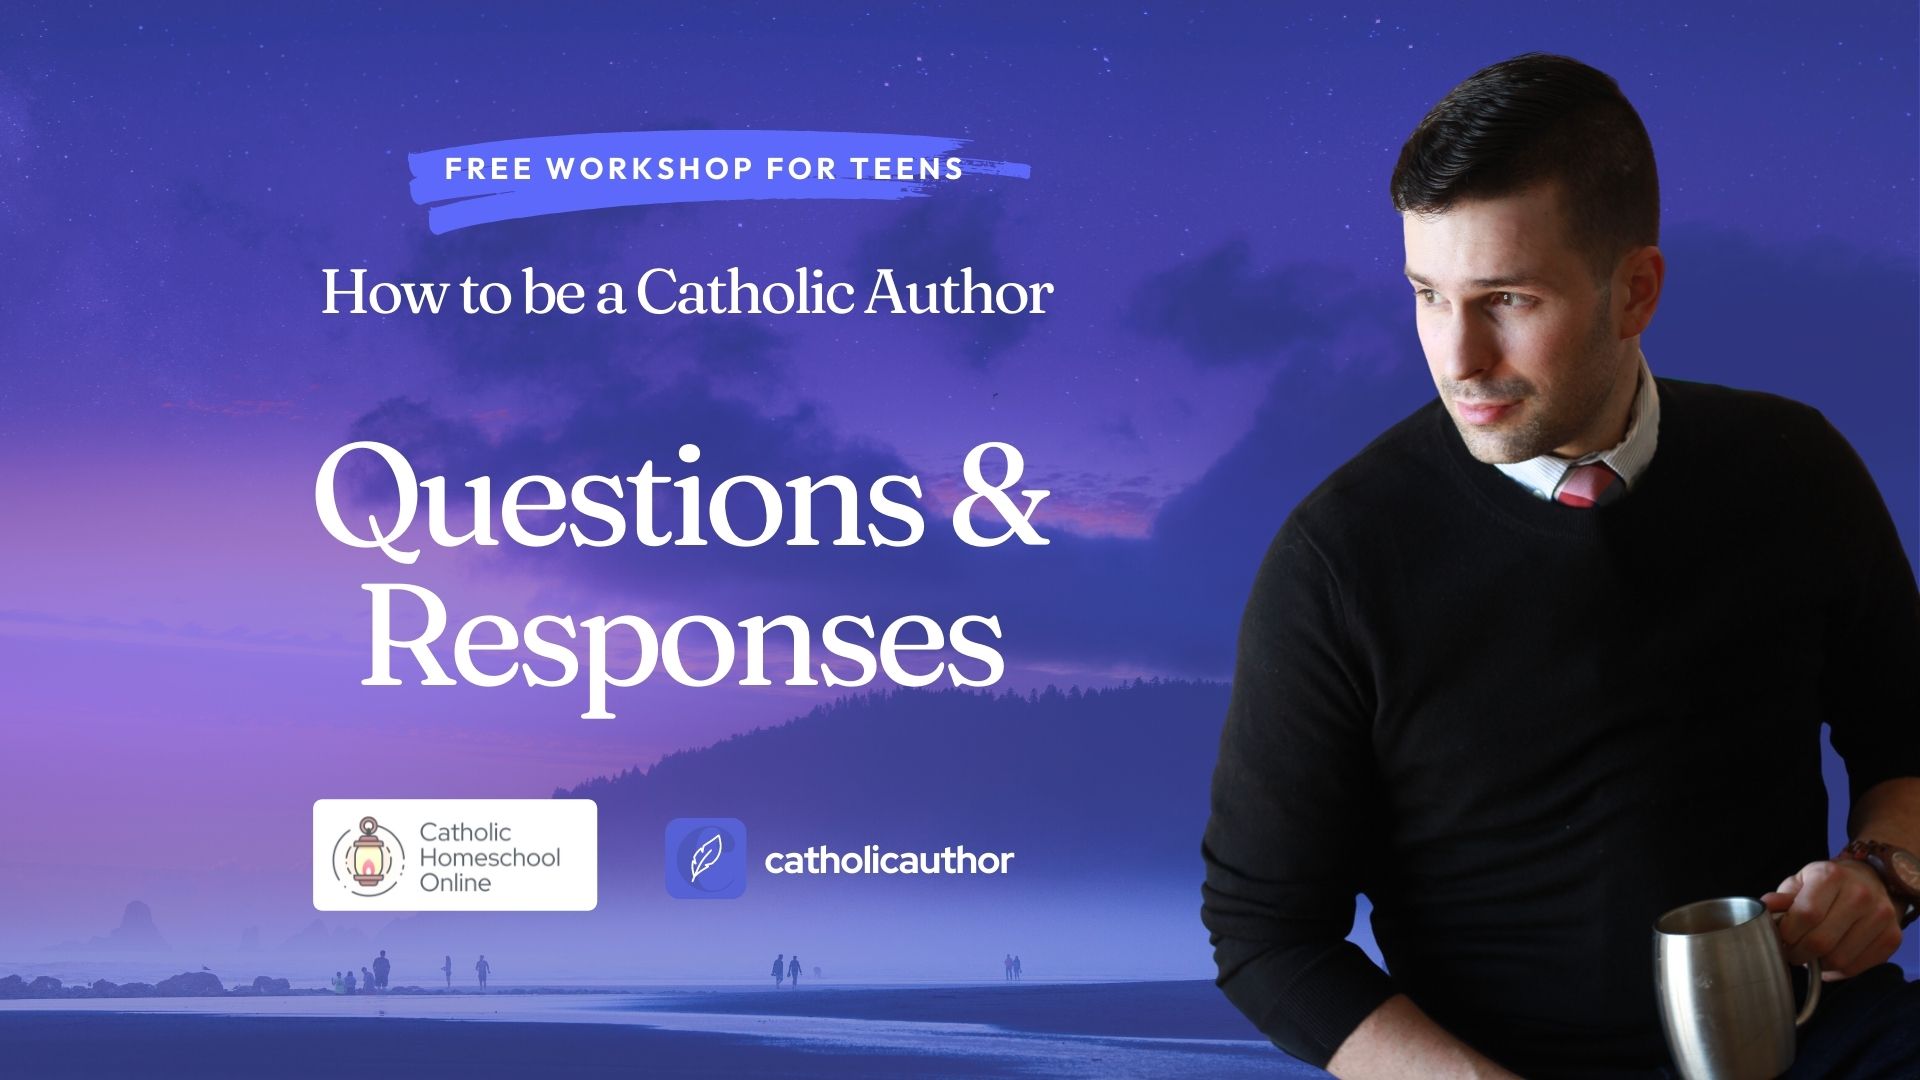 Questions & Responses! from the ‘How to be a Catholic Author’ Workshop